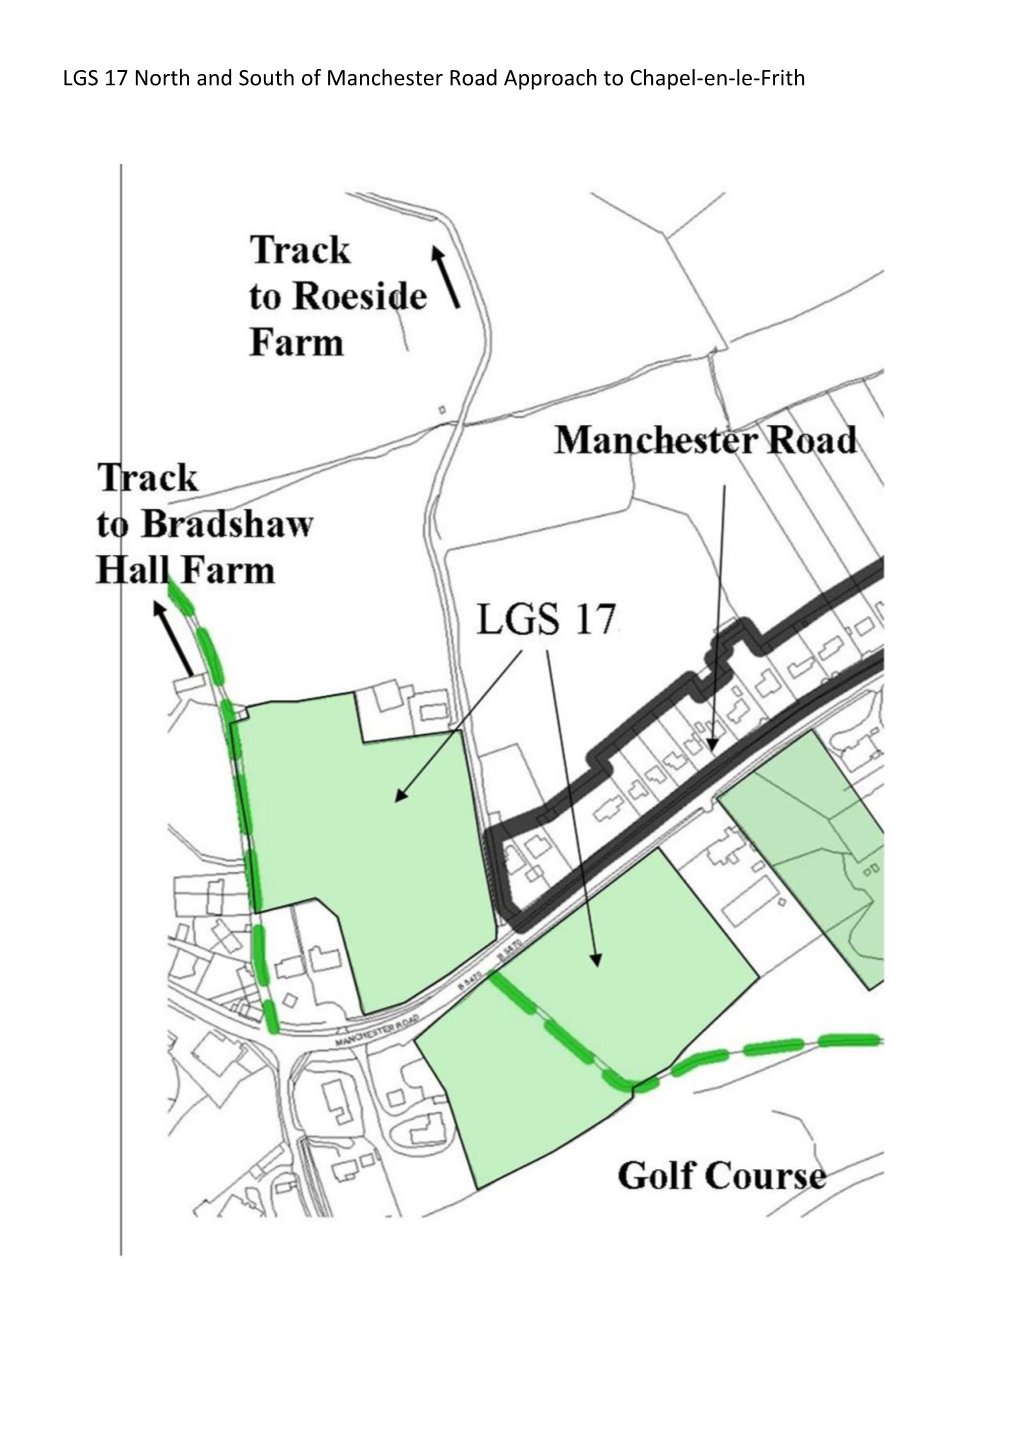 LGS 17 North and South of Manchester Road Approach to Chapel-En-Le-Frith